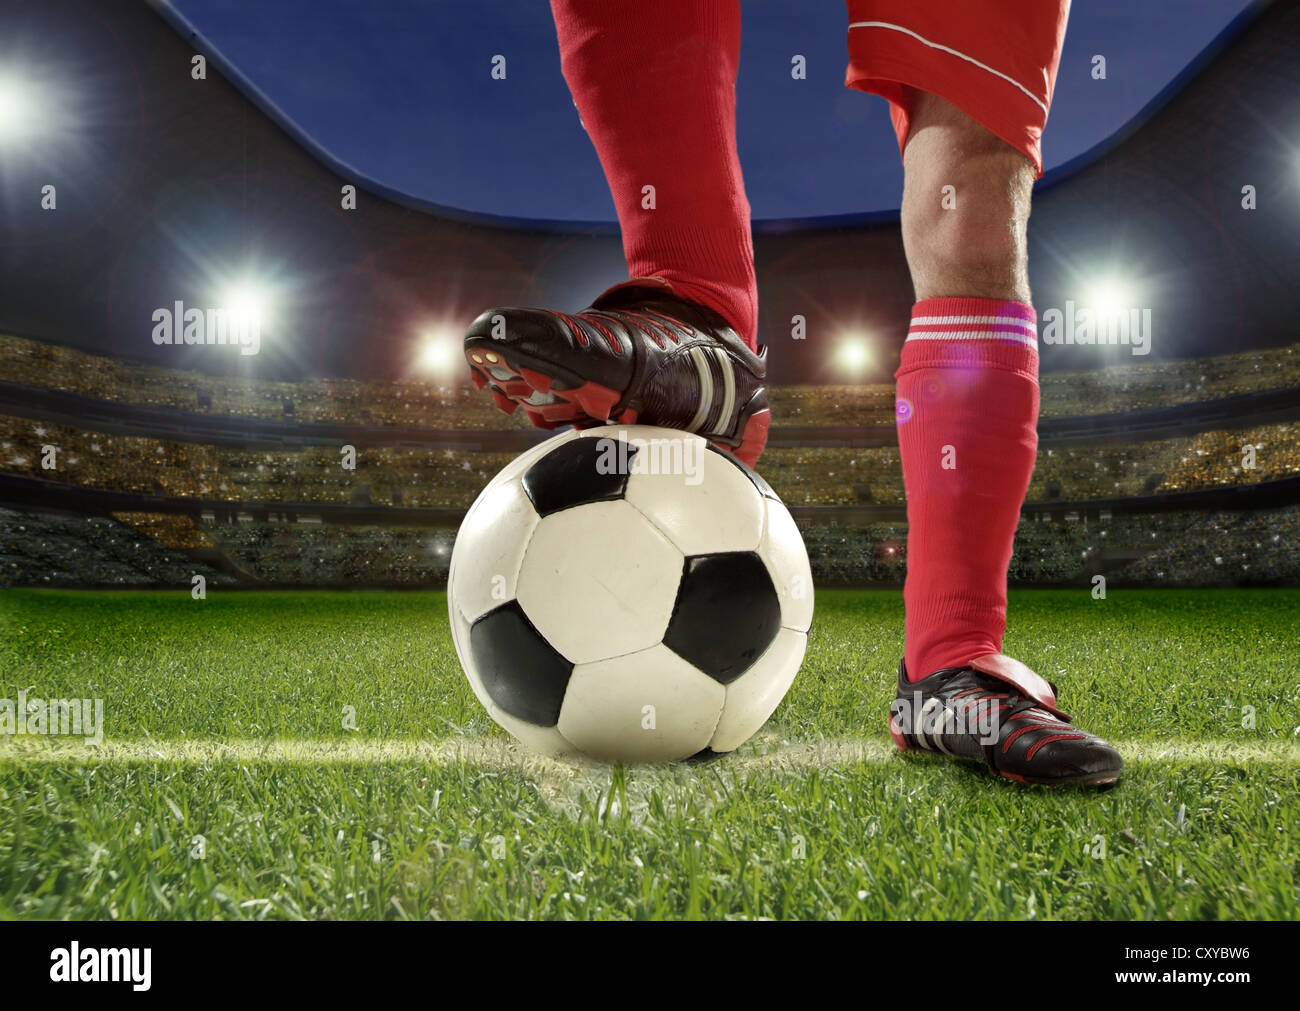 Football player, detail of legs, holding the ball with his foot in a  football stadium Stock Photo - Alamy